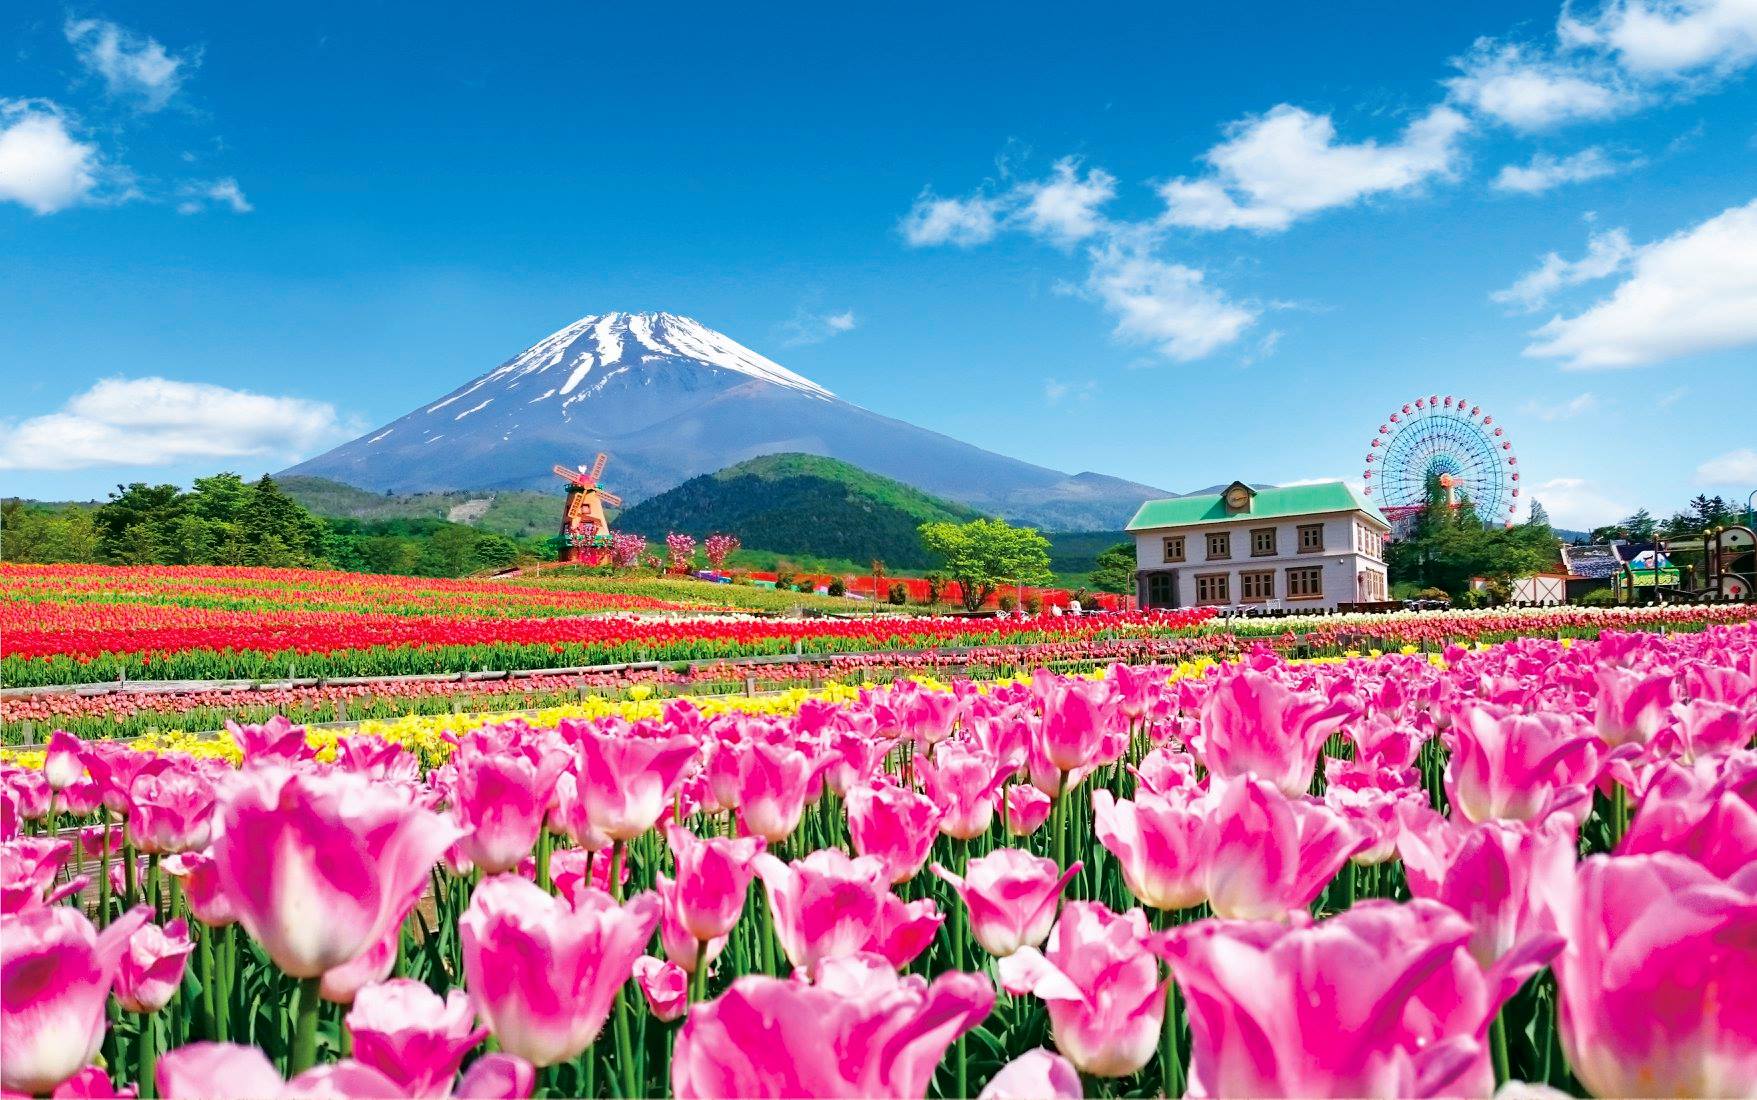 200,000 colourful tulips set against Mount Fuji backdrop in Japan from Apr.  20 to May 26, 2019  - News from Singapore, Asia and around  the world